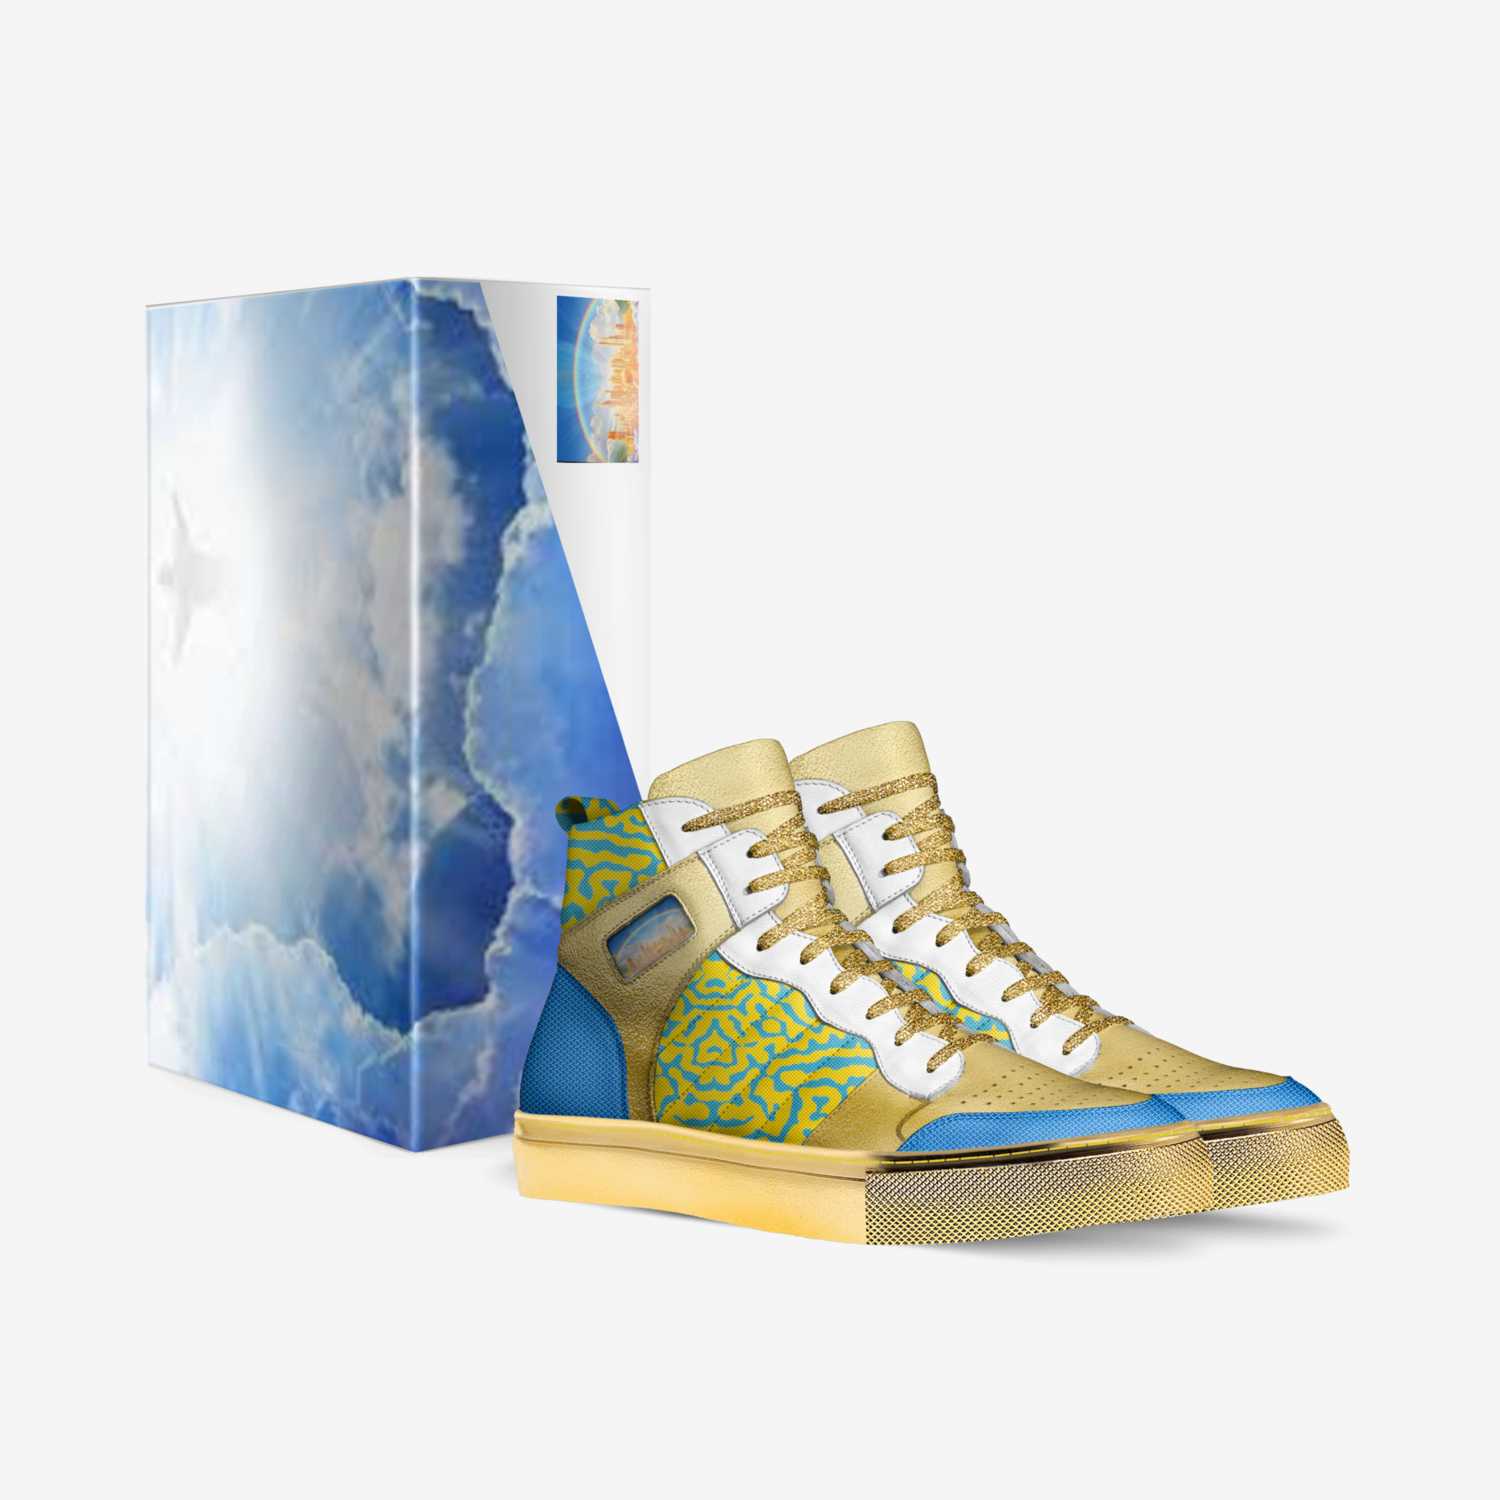 Jesus Kingdom custom made in Italy shoes by Jesse Hilliard | Box view